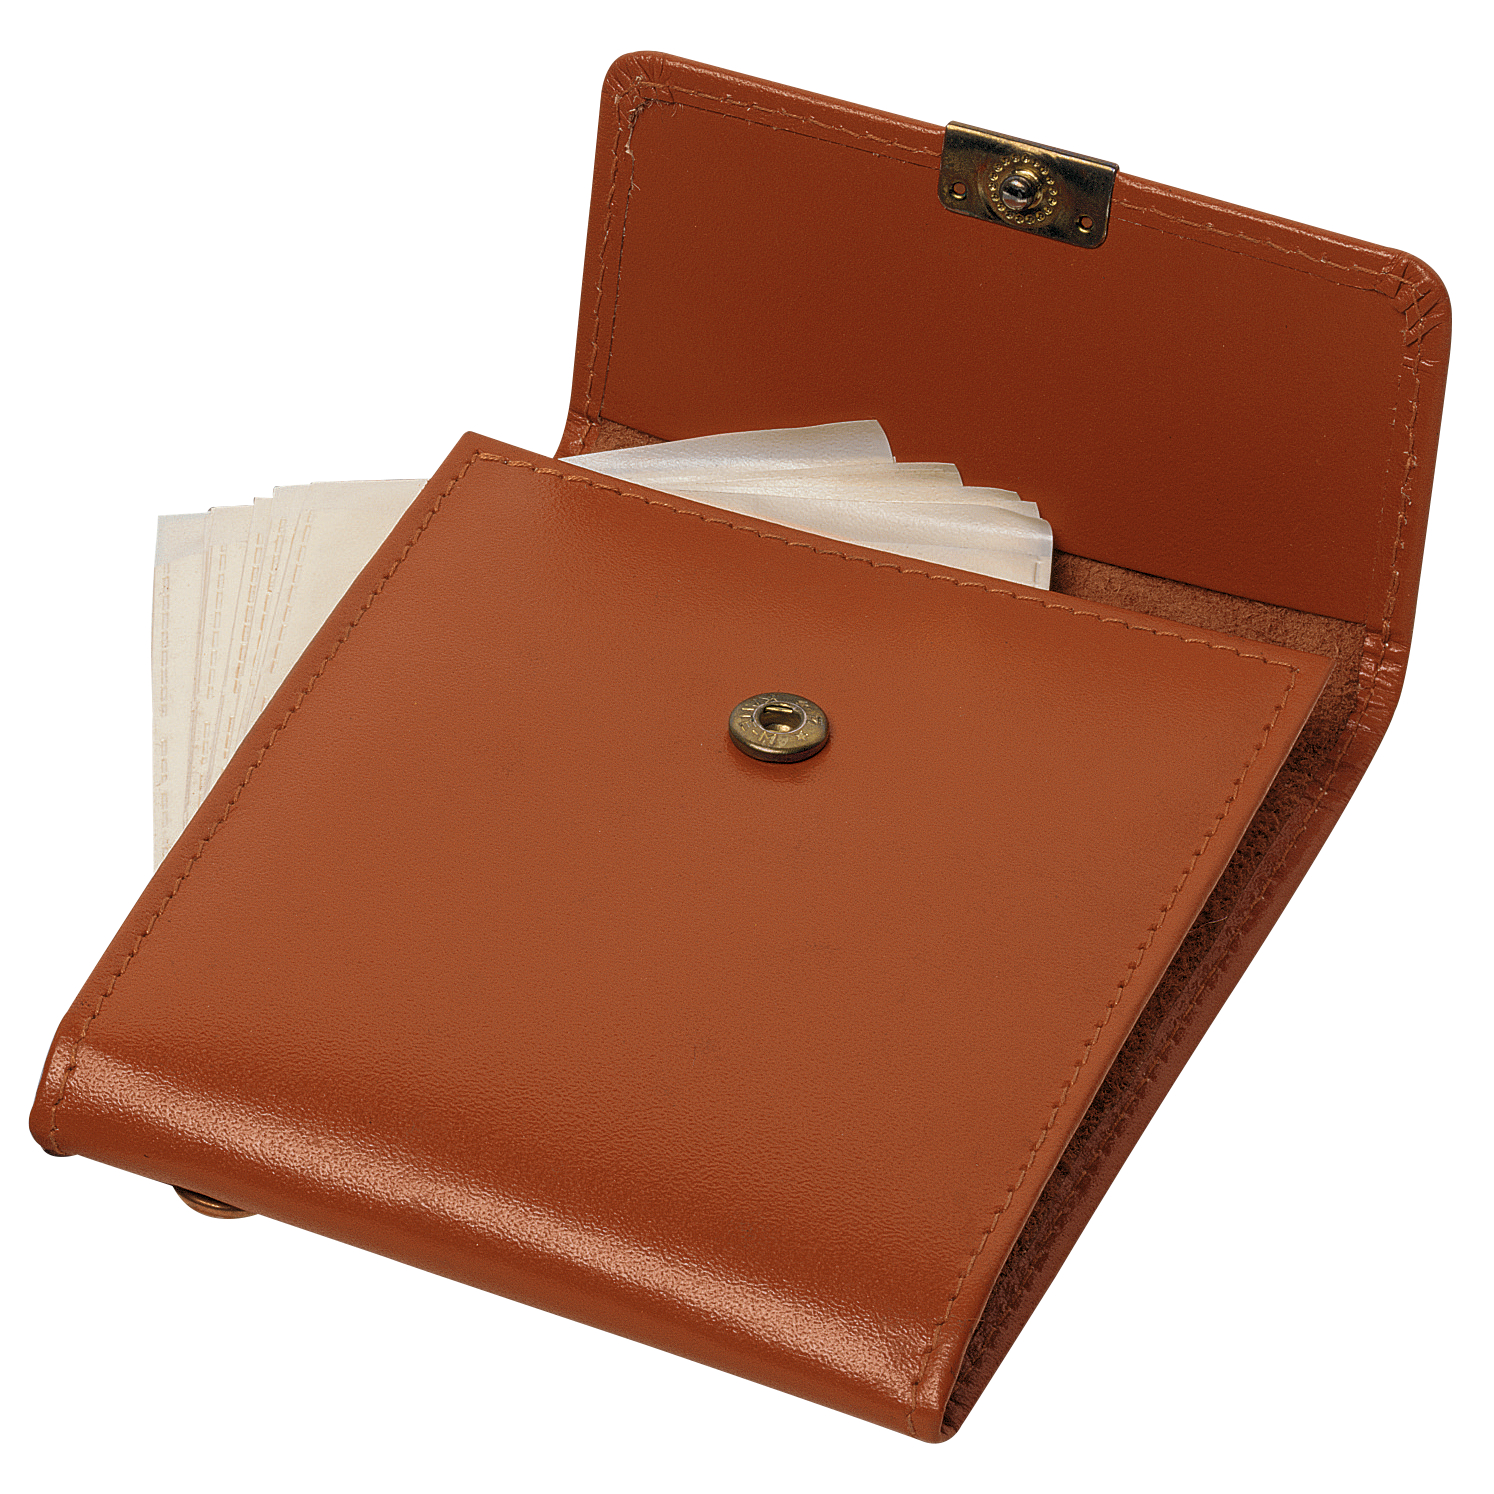 Perca Trout Trace Wallet Deluxe 